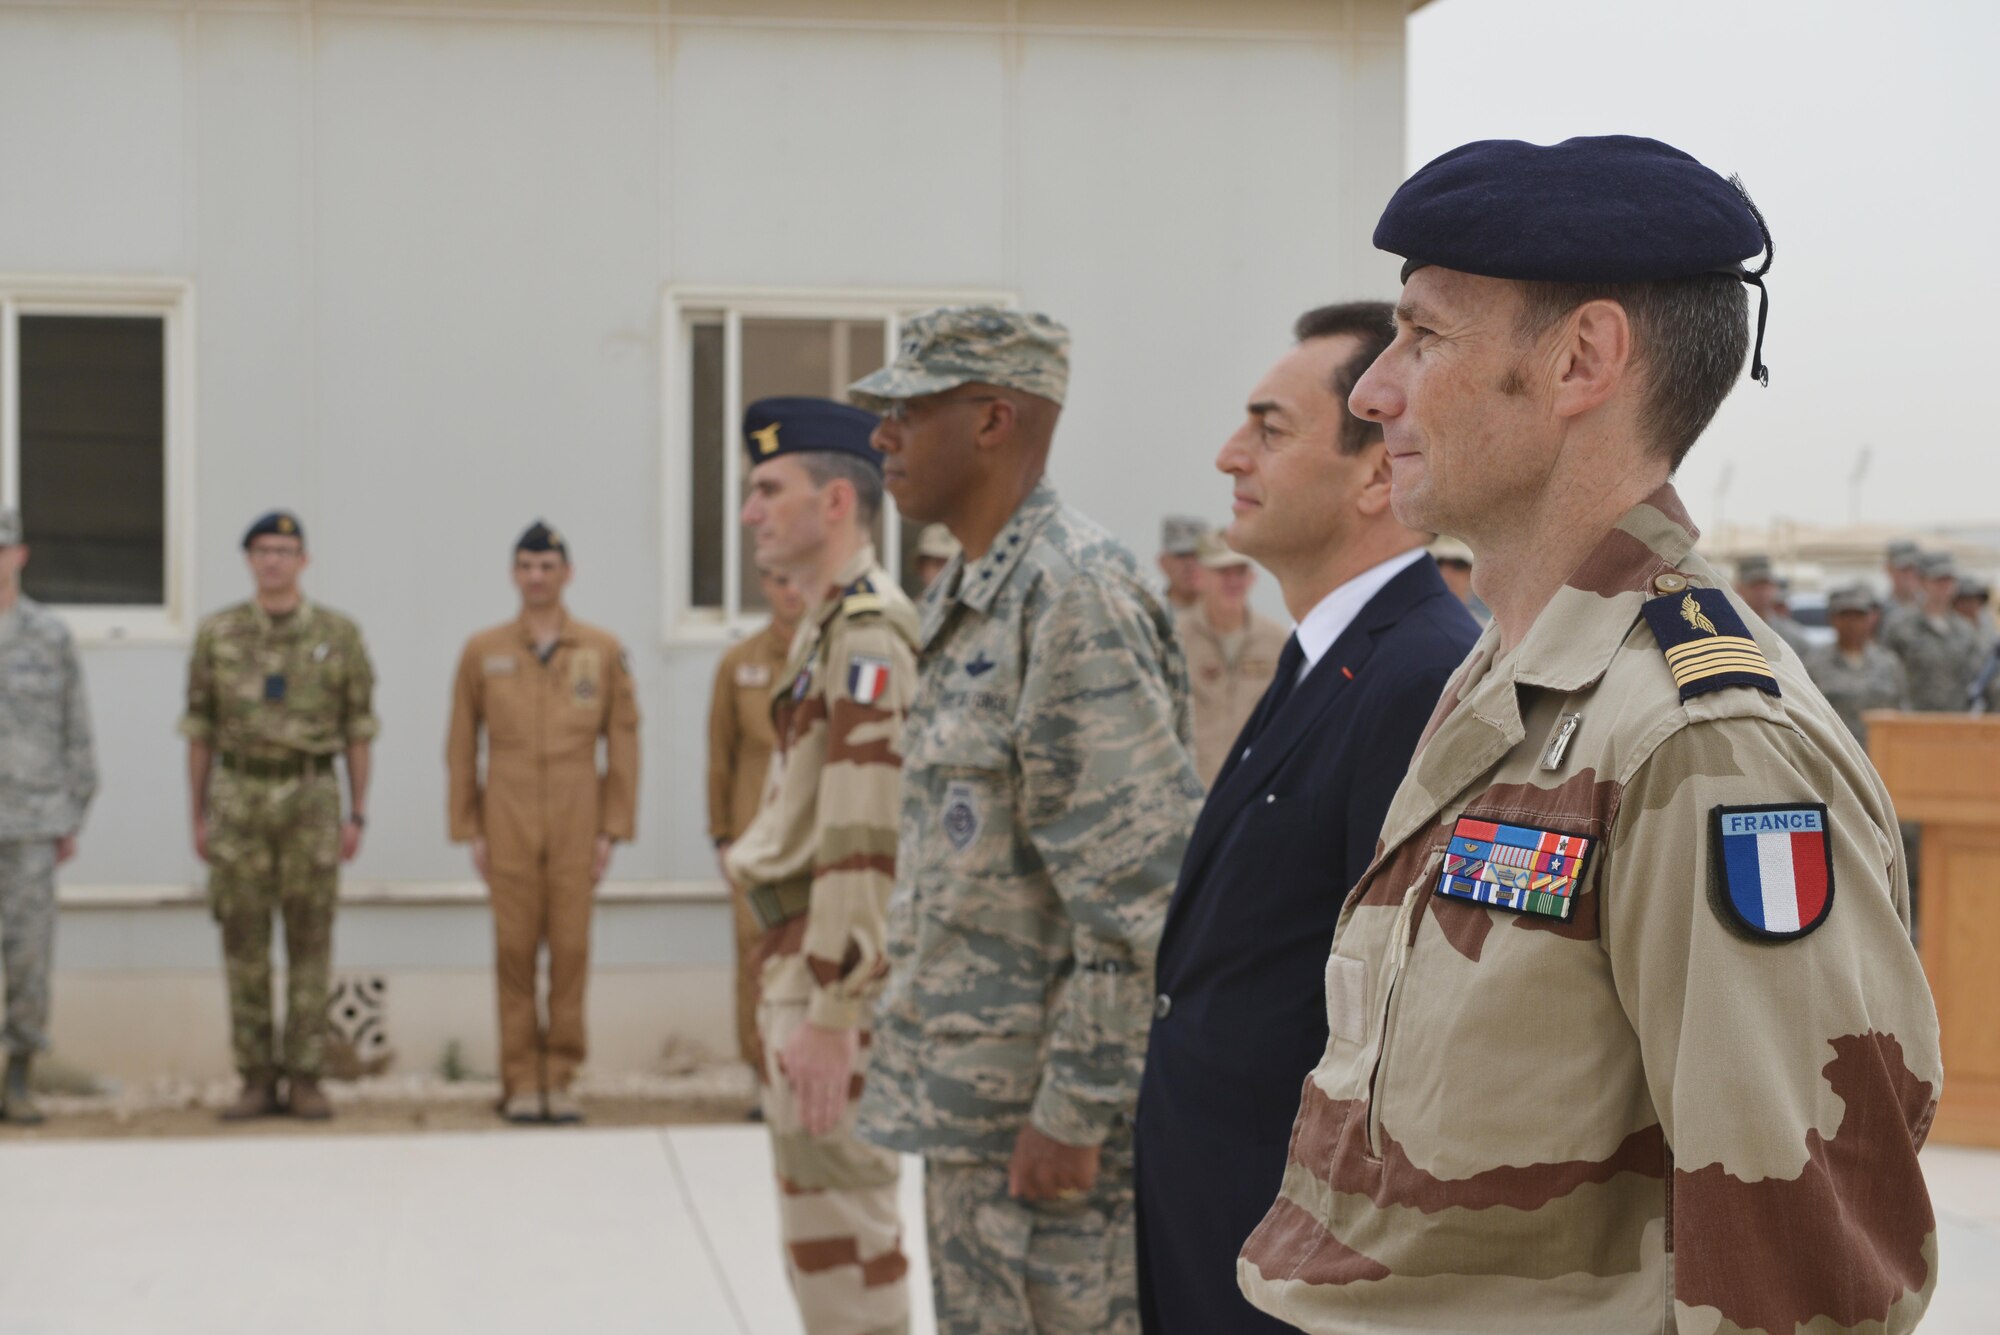 Coalition Forces commanders stand at attention after recognizing French National Defense Medal recipients during the Bastille Day ceremony July 14, 2015 at Al Udeid Air Base, Qatar. The French celebrate July 14th as Bastille Day to commemorate the storming of Bastille at the beginning of the French revolution in 1789. (U.S. Air Force photo/Staff Sgt. Alexandre Montes) 